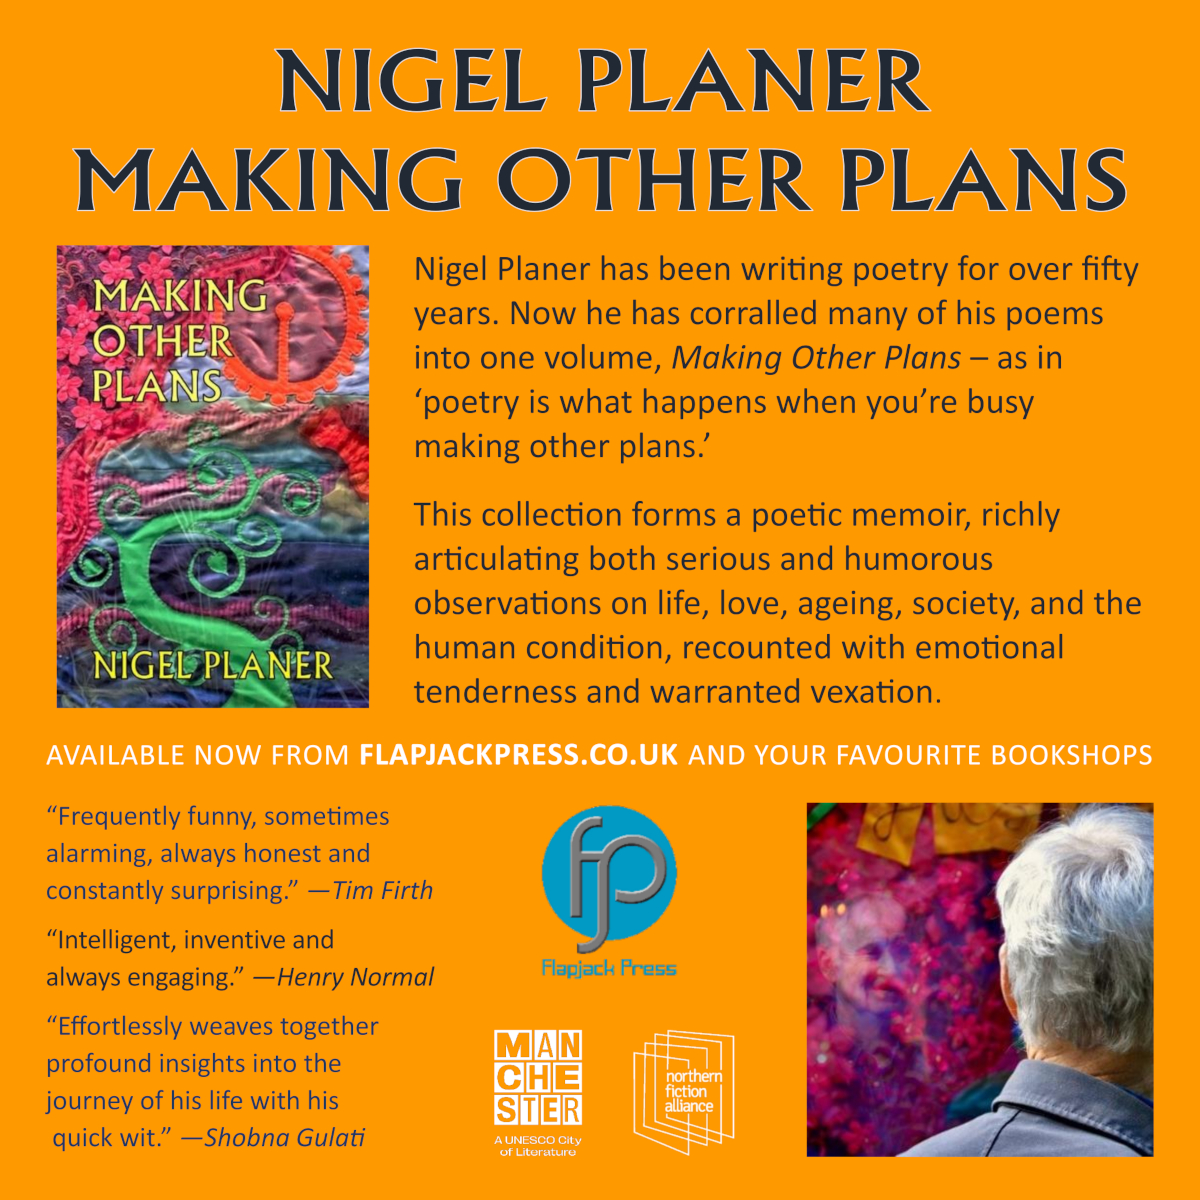 Expand your horizons (and book collection) with Making Other Plans, the wonderful new #poetry collection by @NigelPlaner1. Available now from flapjackpress.co.uk and the bookseller of your choice. 'A unique piece of poetic time travel.' Tim Firth